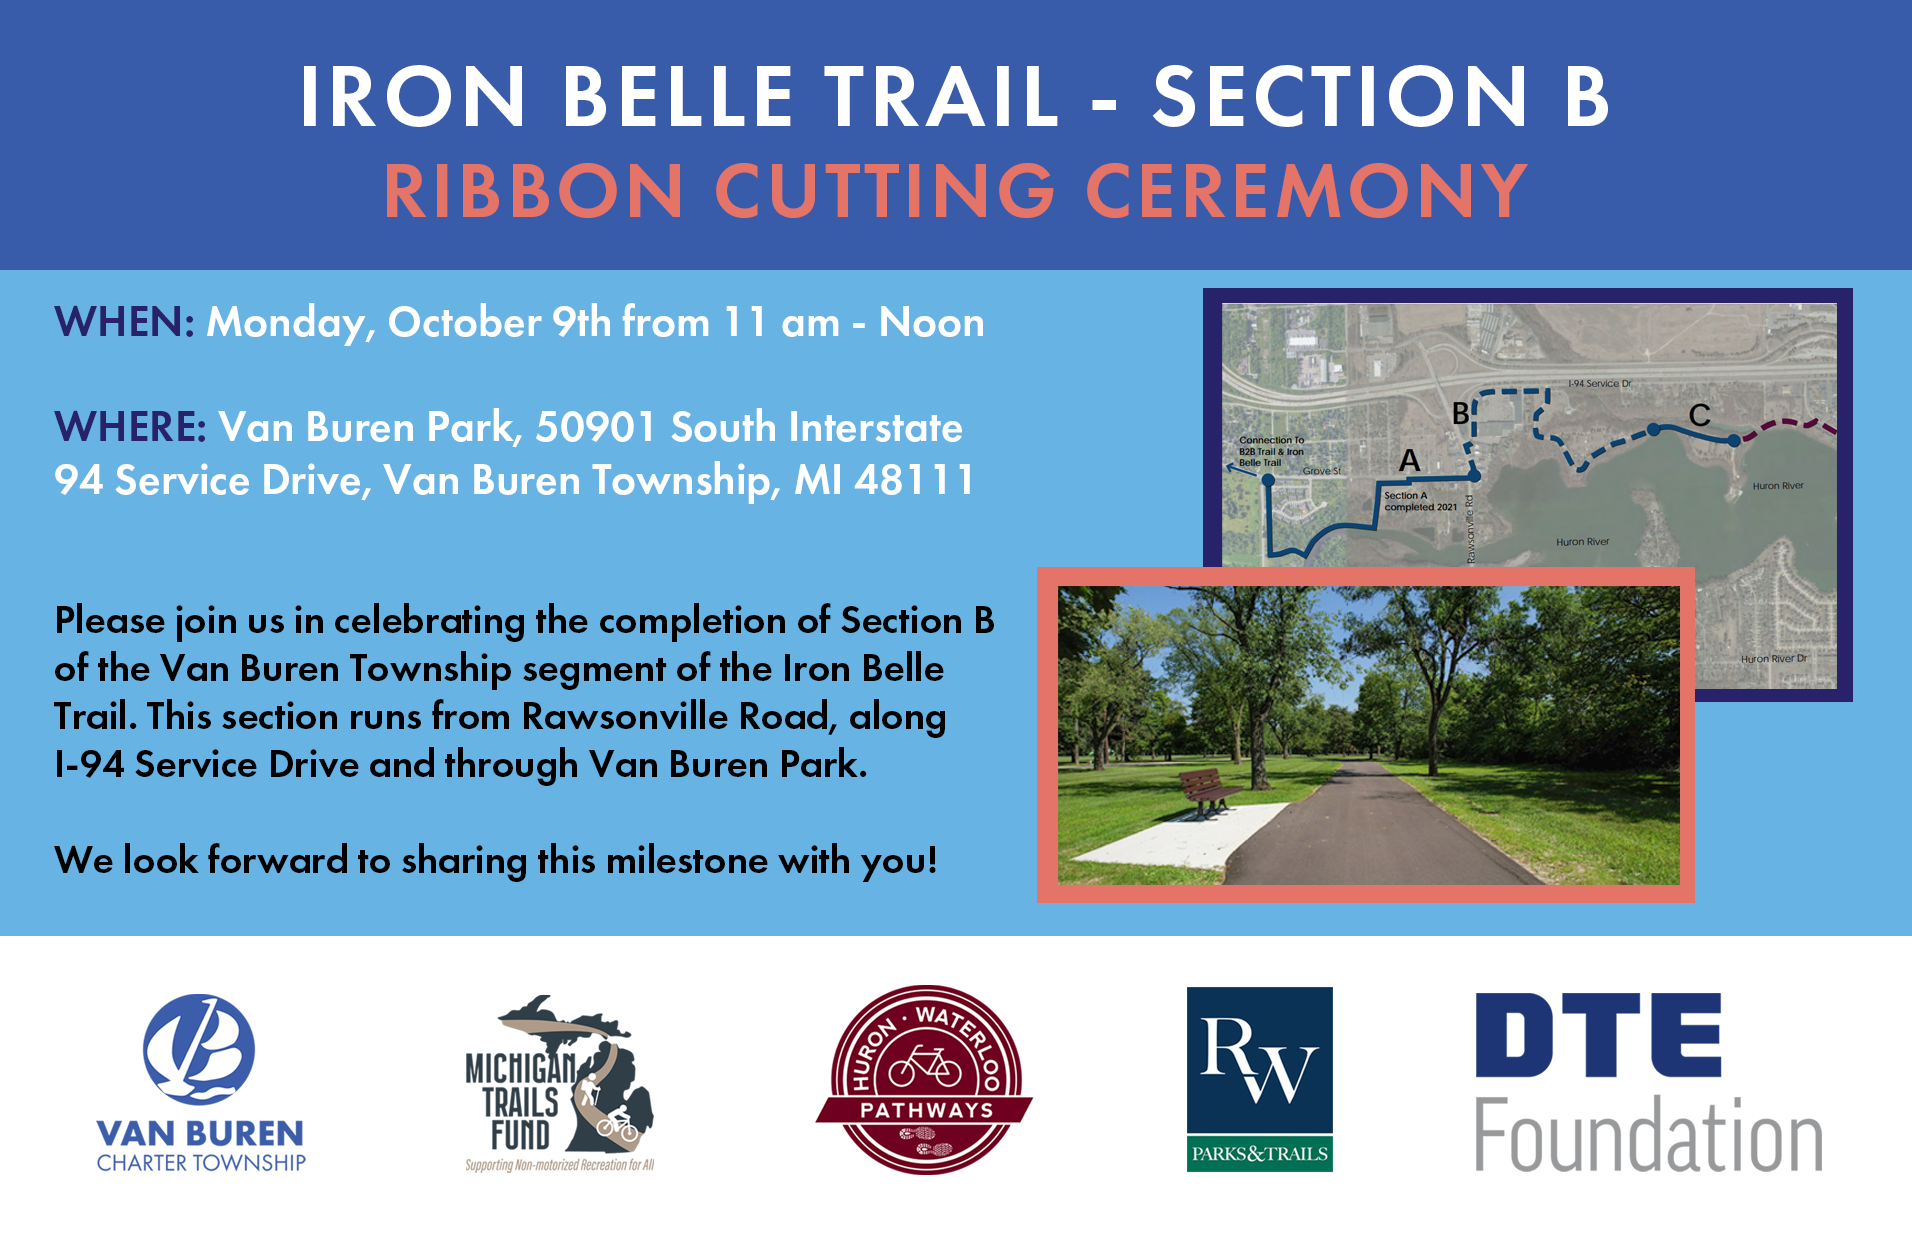 Iron Belle Trail Section B Ribbon Cutting